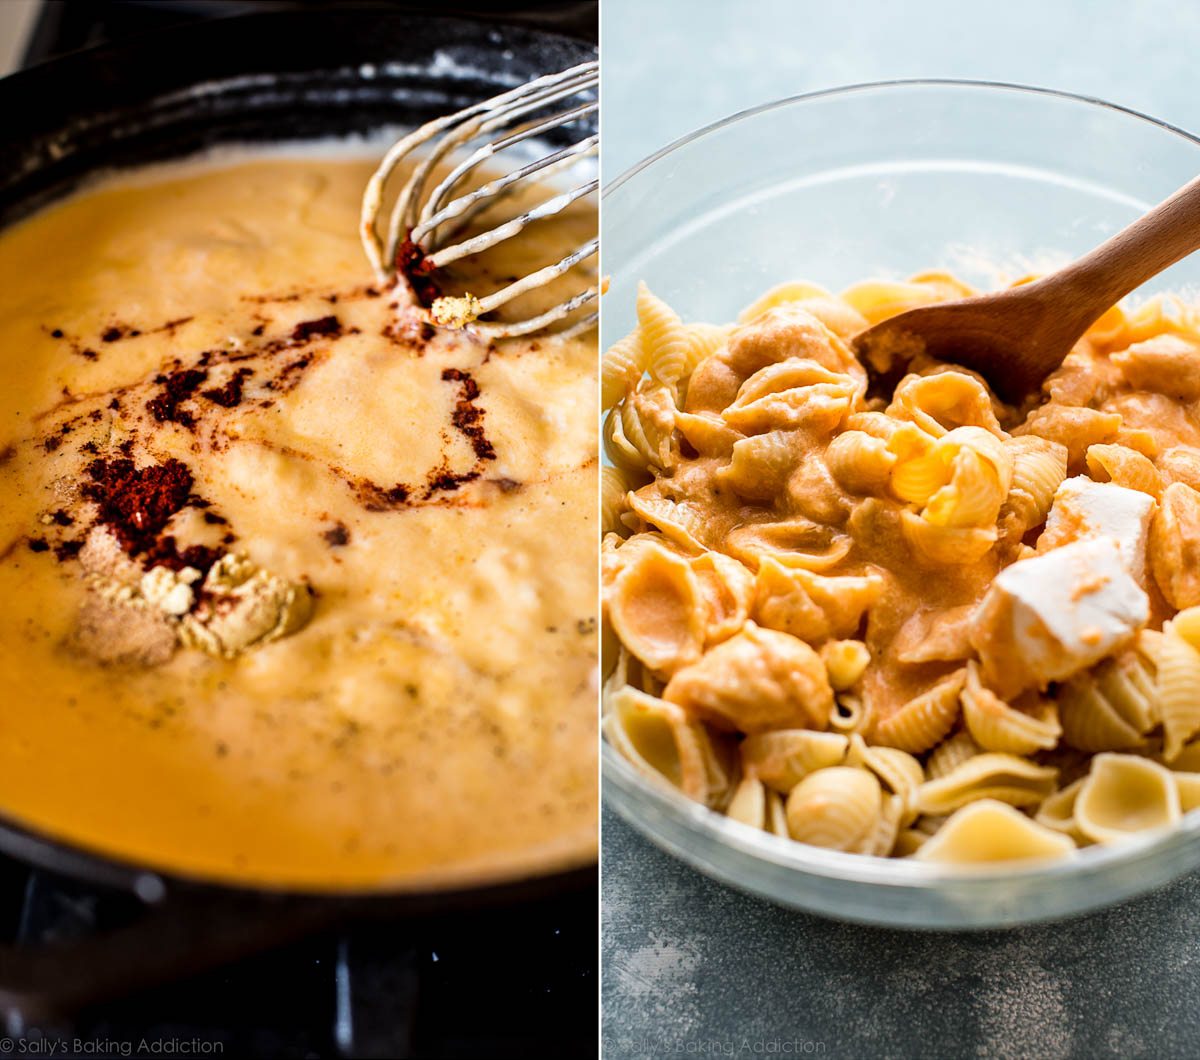 2 images of cheese sauce in a skillet on the stove and mixing cheese sauce and noodles in a glass bowl with a wood spoon